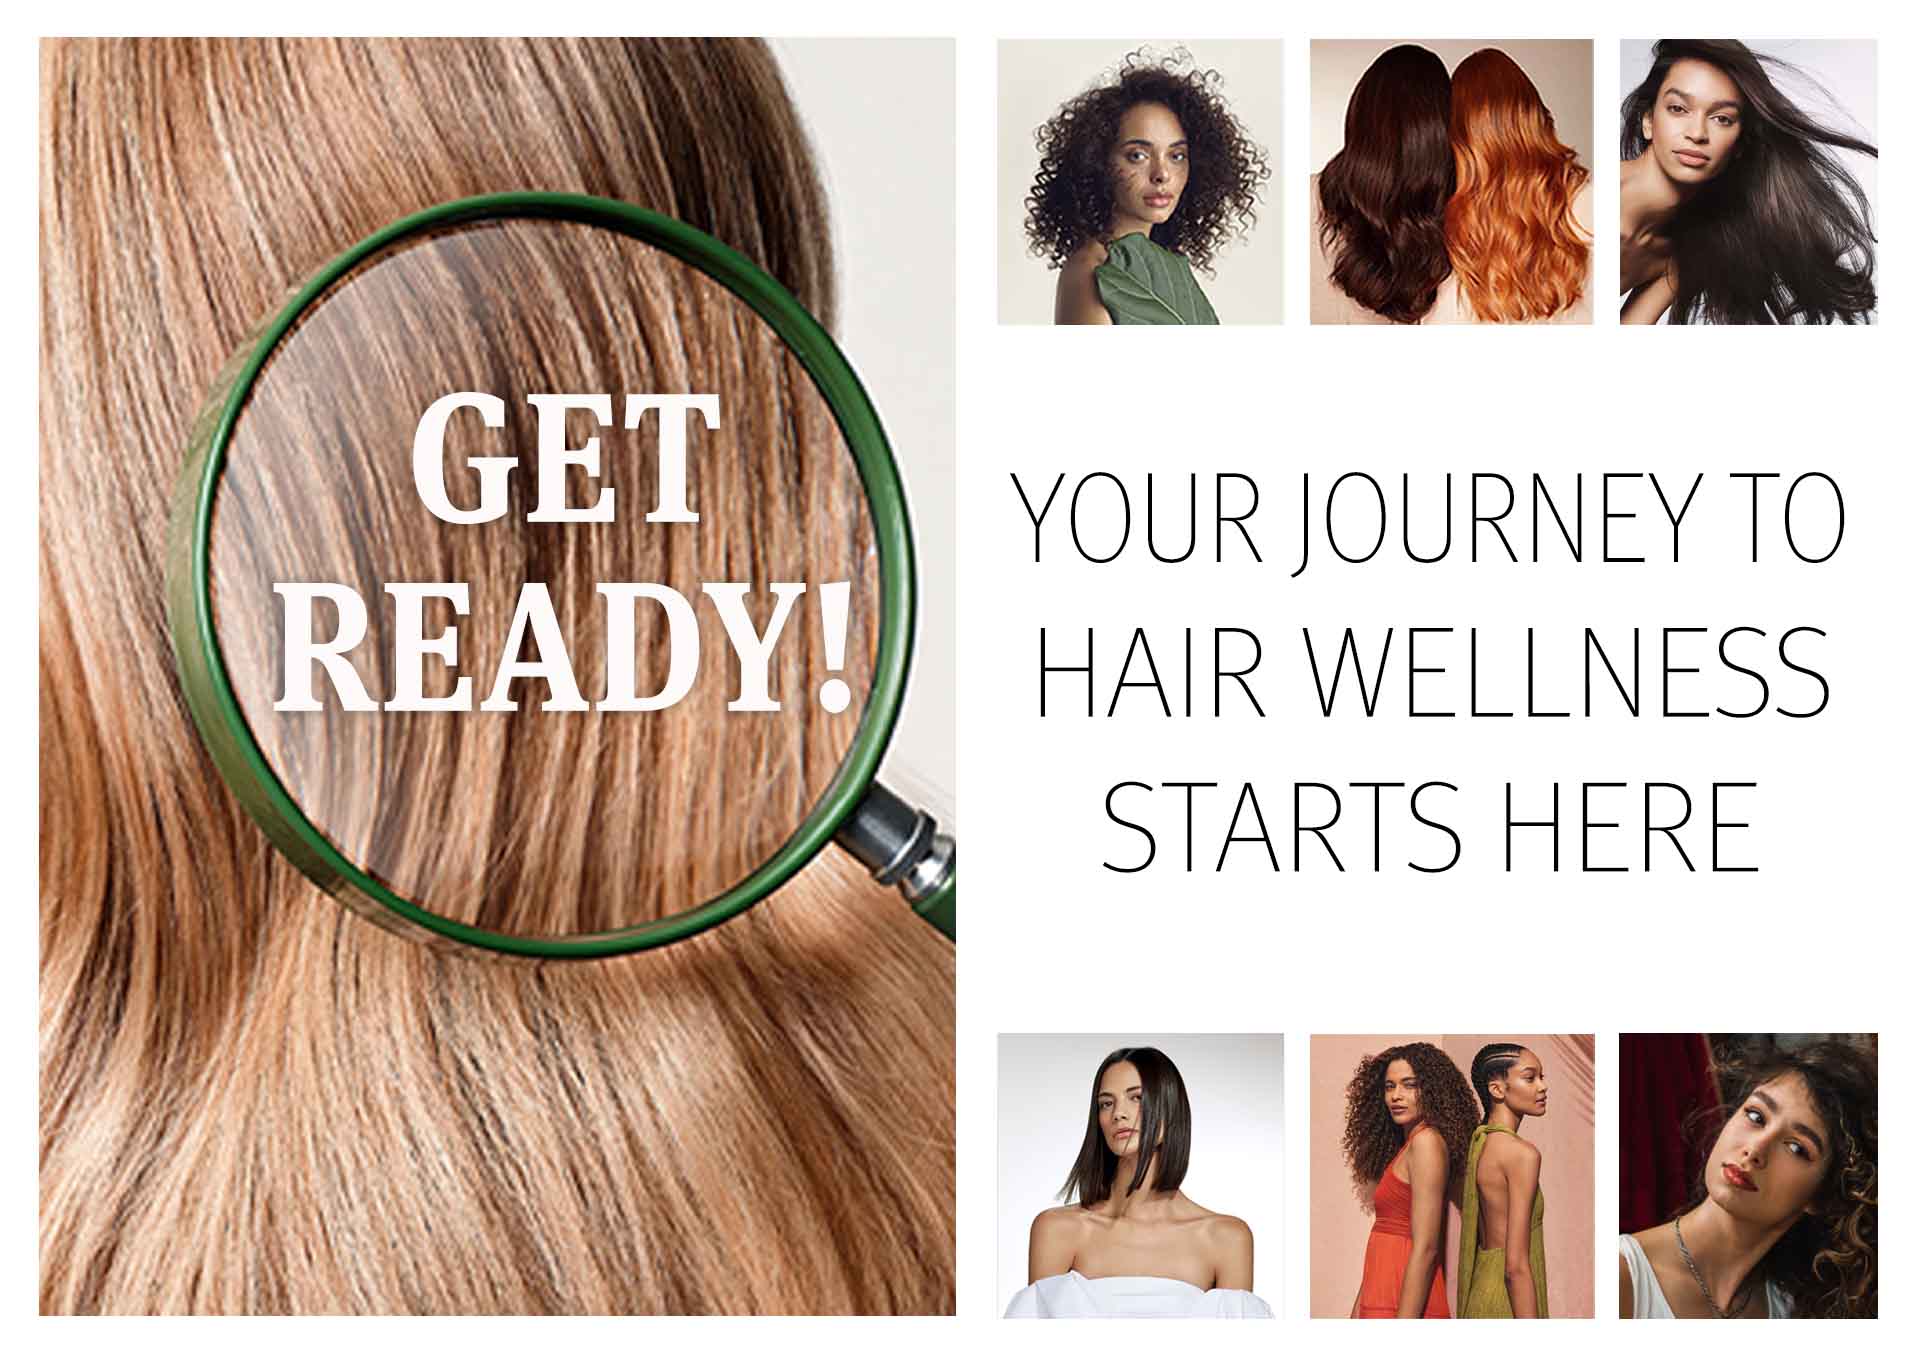 Get Ready! Your journey to hair wellness starts here.